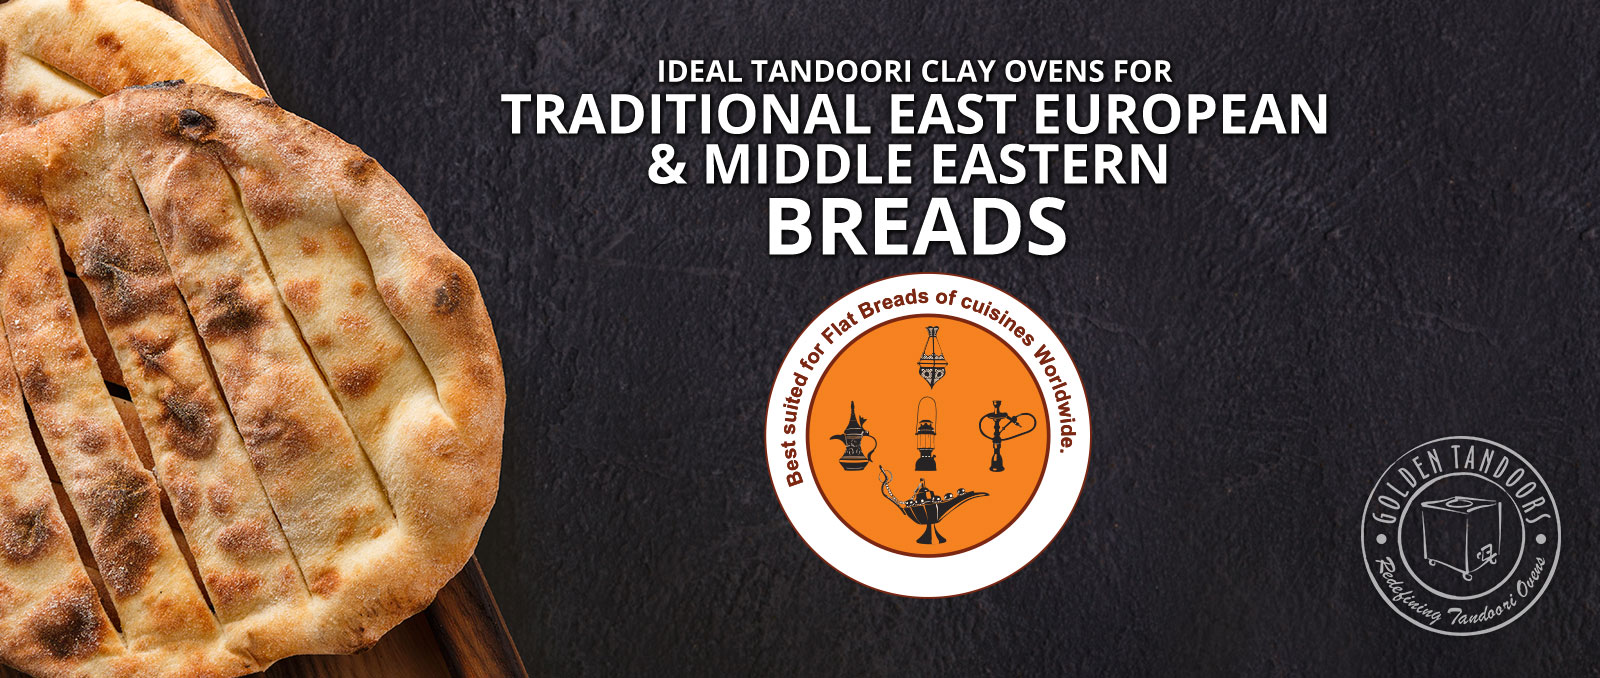 tandoori breads for middle east